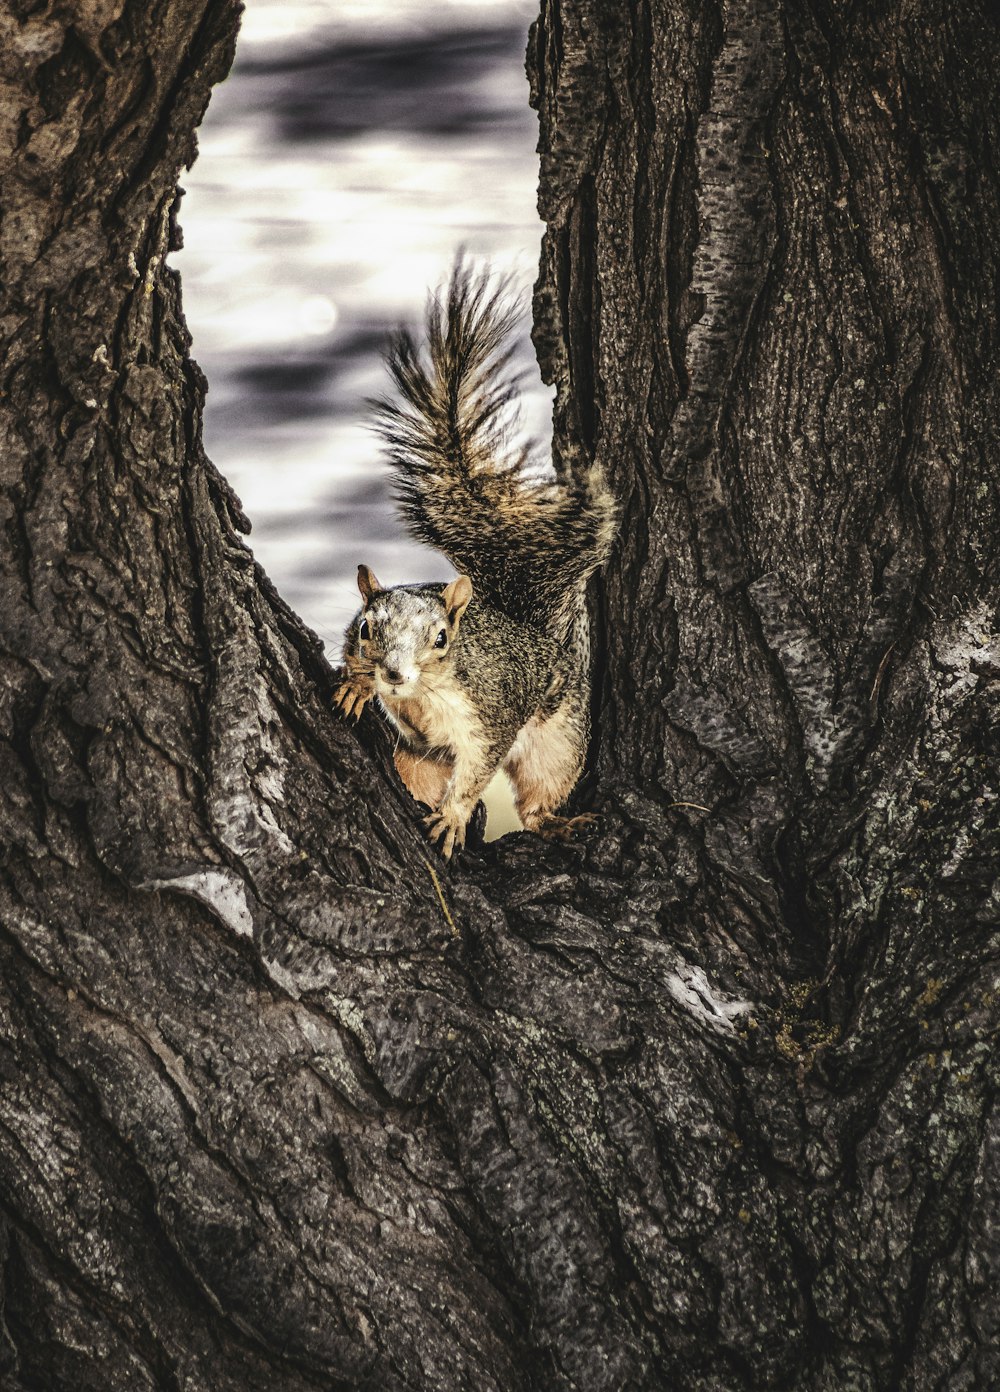 a squirrel on a tree